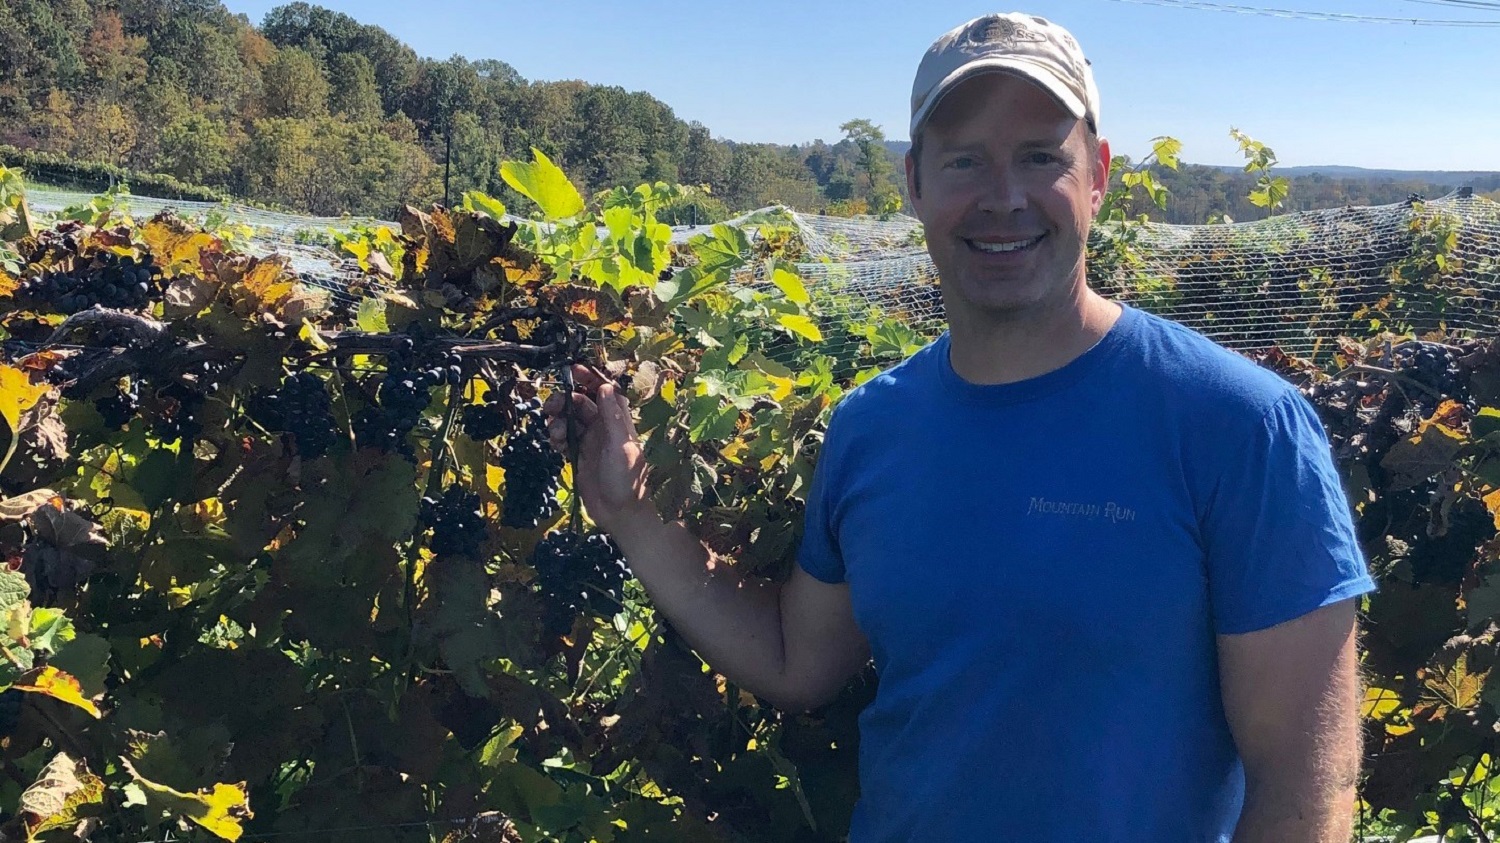 Our owner with fall grapes